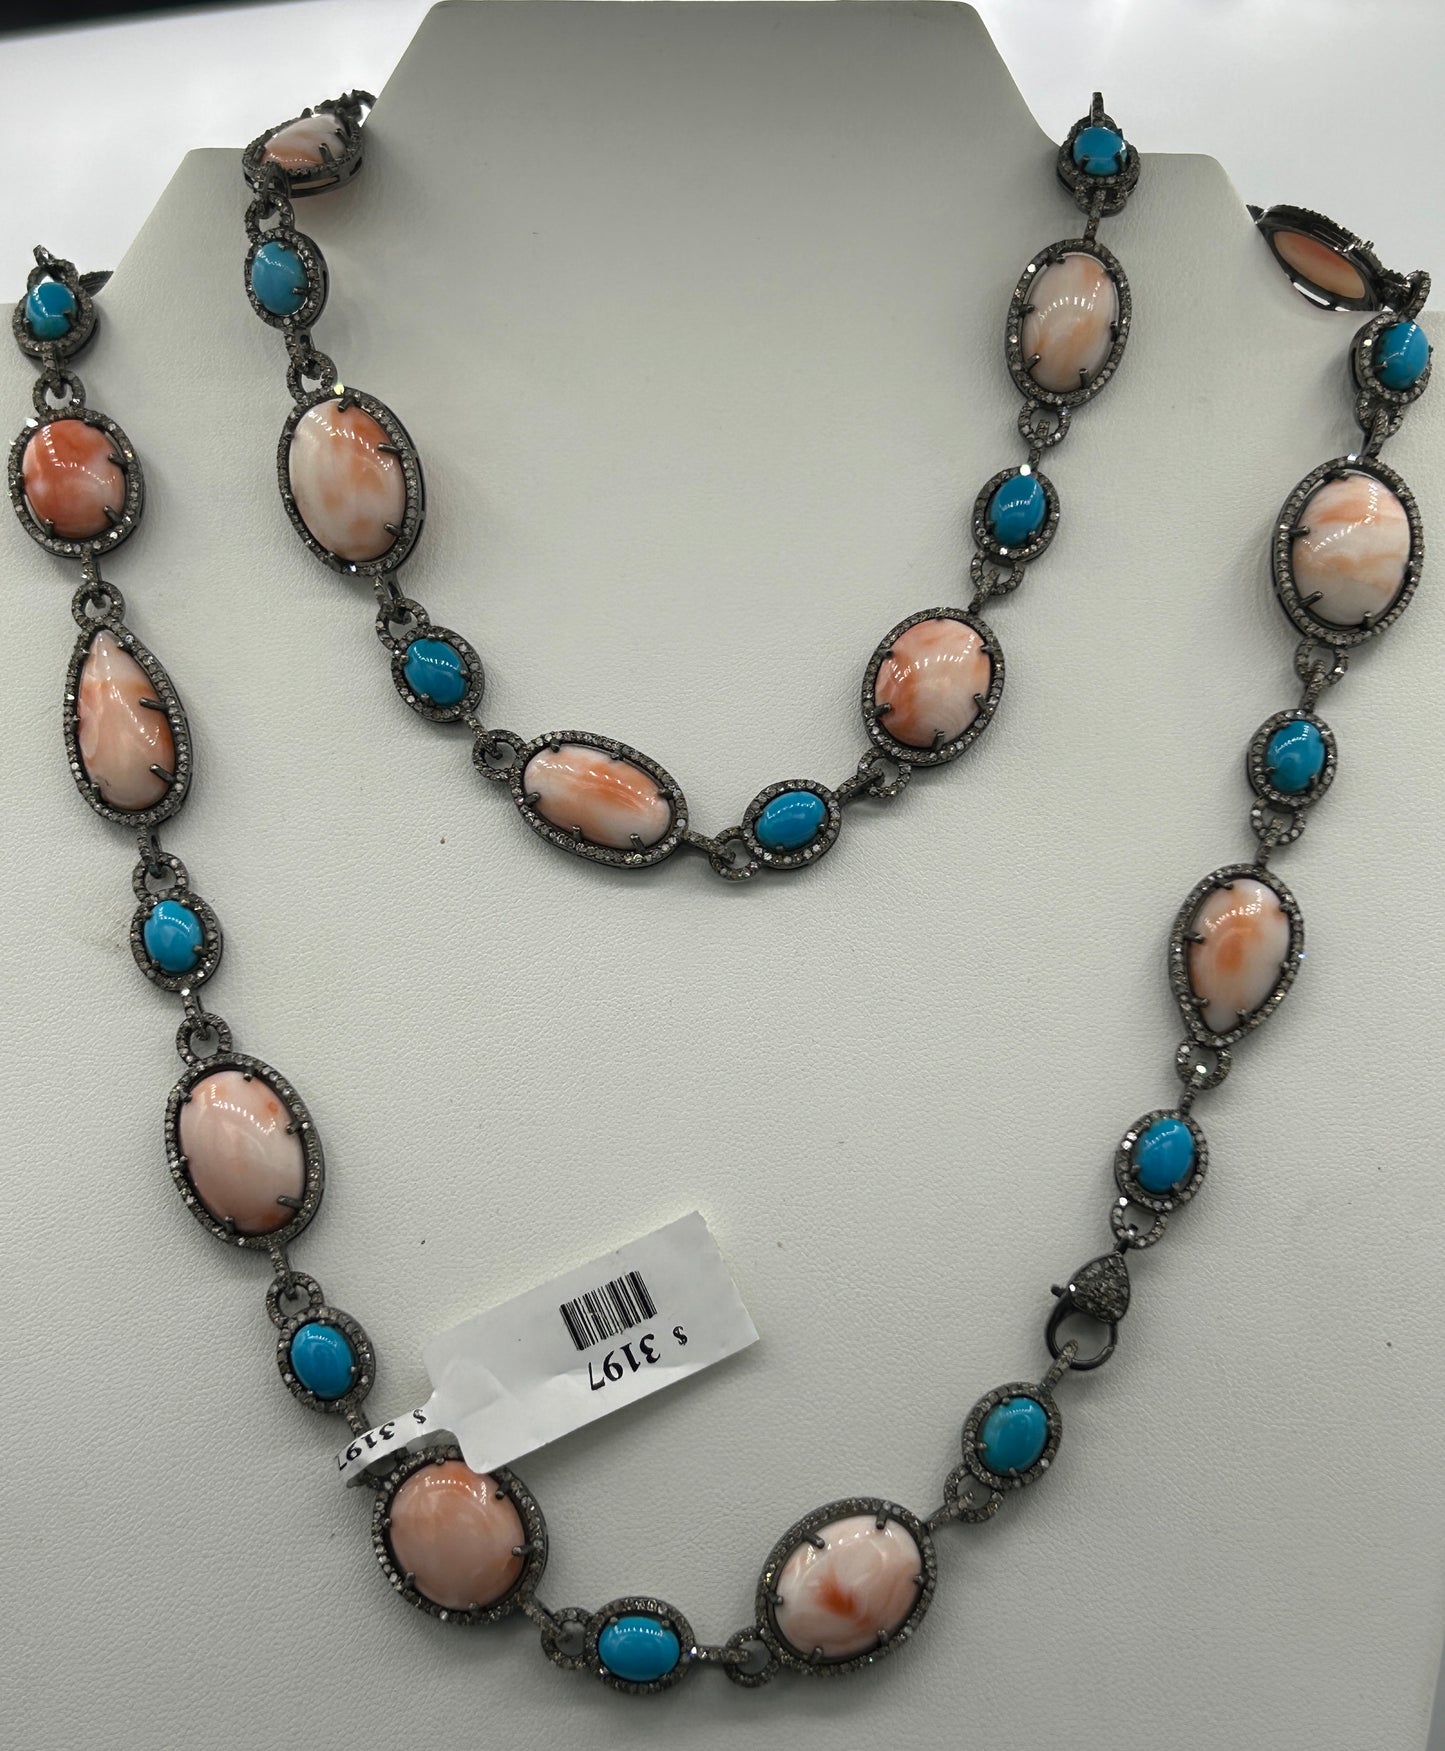 Turqouise and Coral Necklace with Diamonds